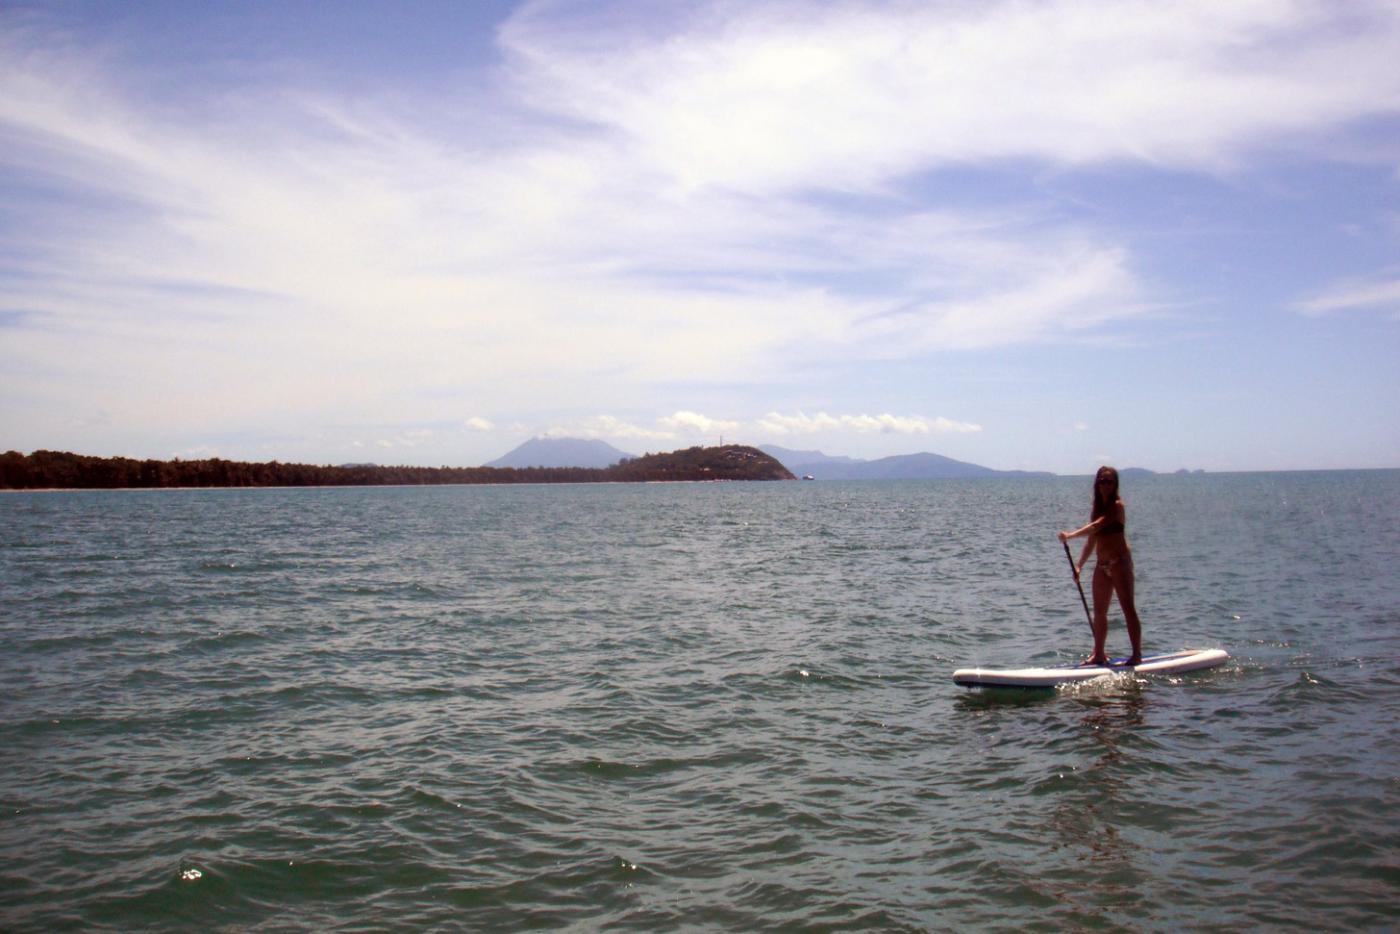 Taylor tries her hand at stand-up paddleboarding.